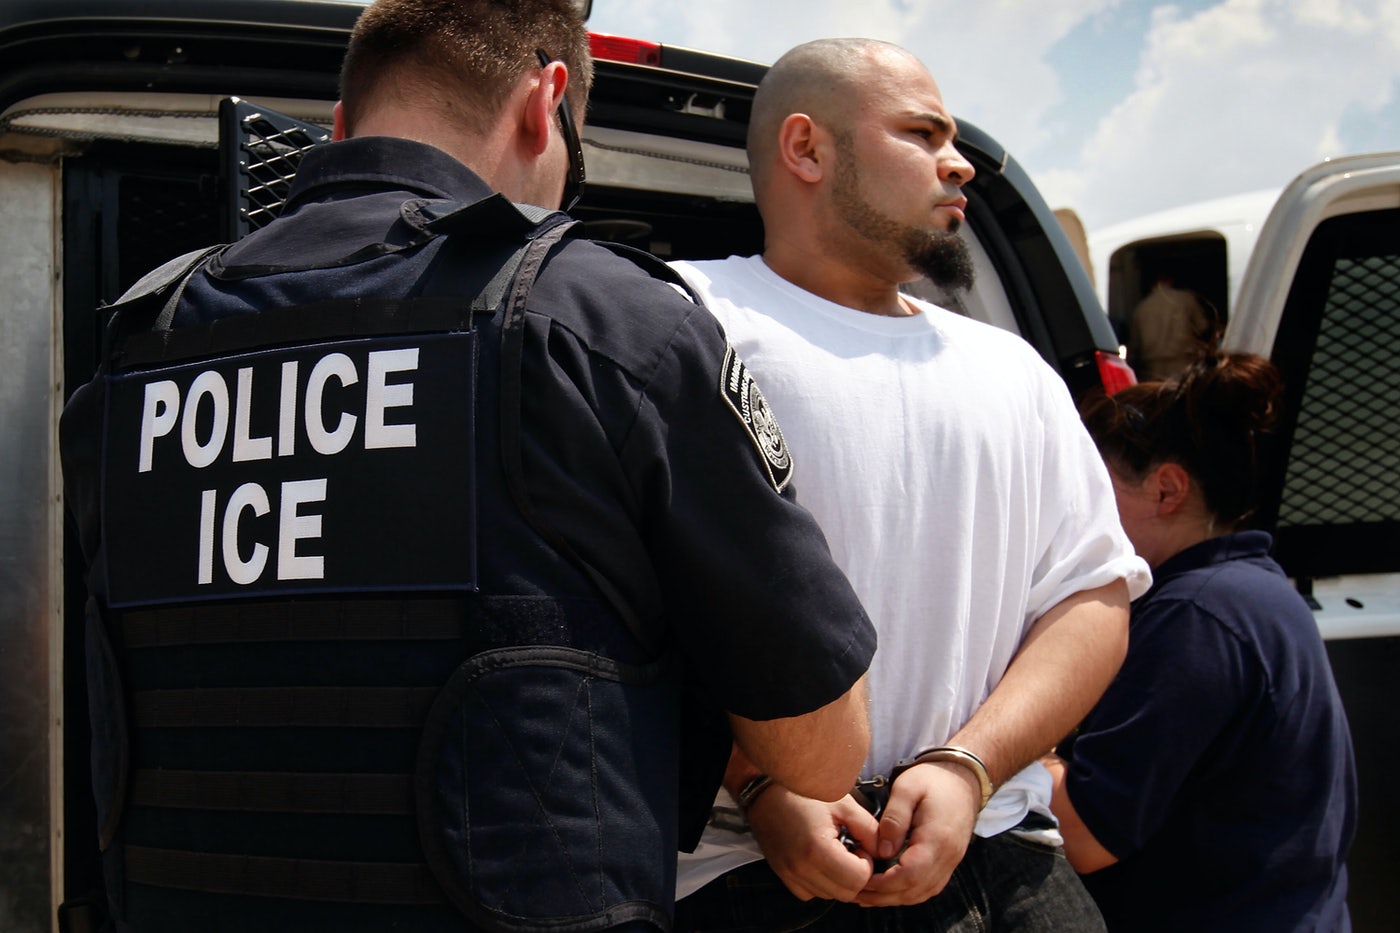 Is e police. Police Ice. Ice+Enforcement. Ice+agent. "Ice agent"+migrant.